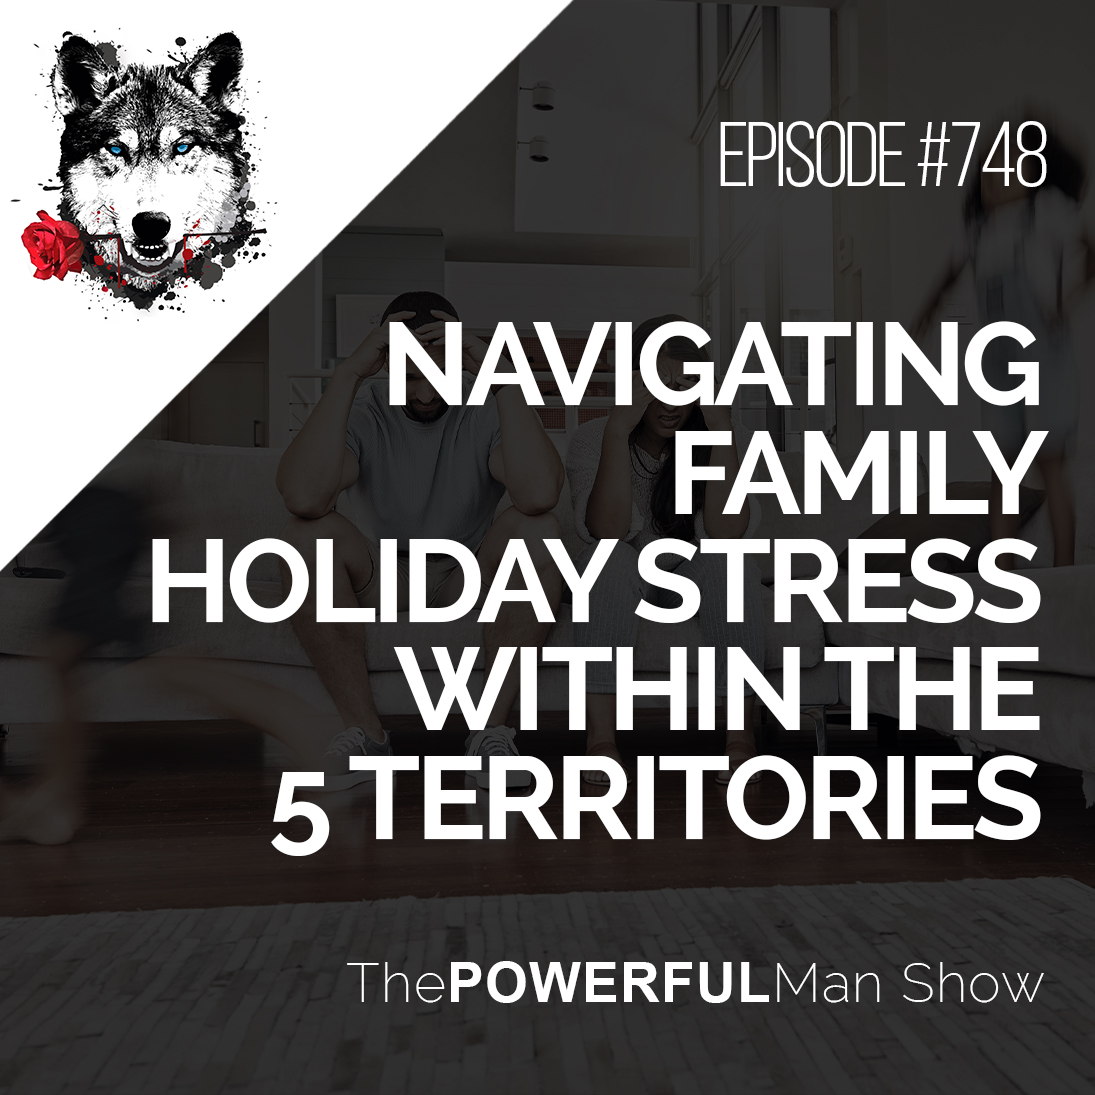 Navigating Family Holiday Stress Within The 5 Territories